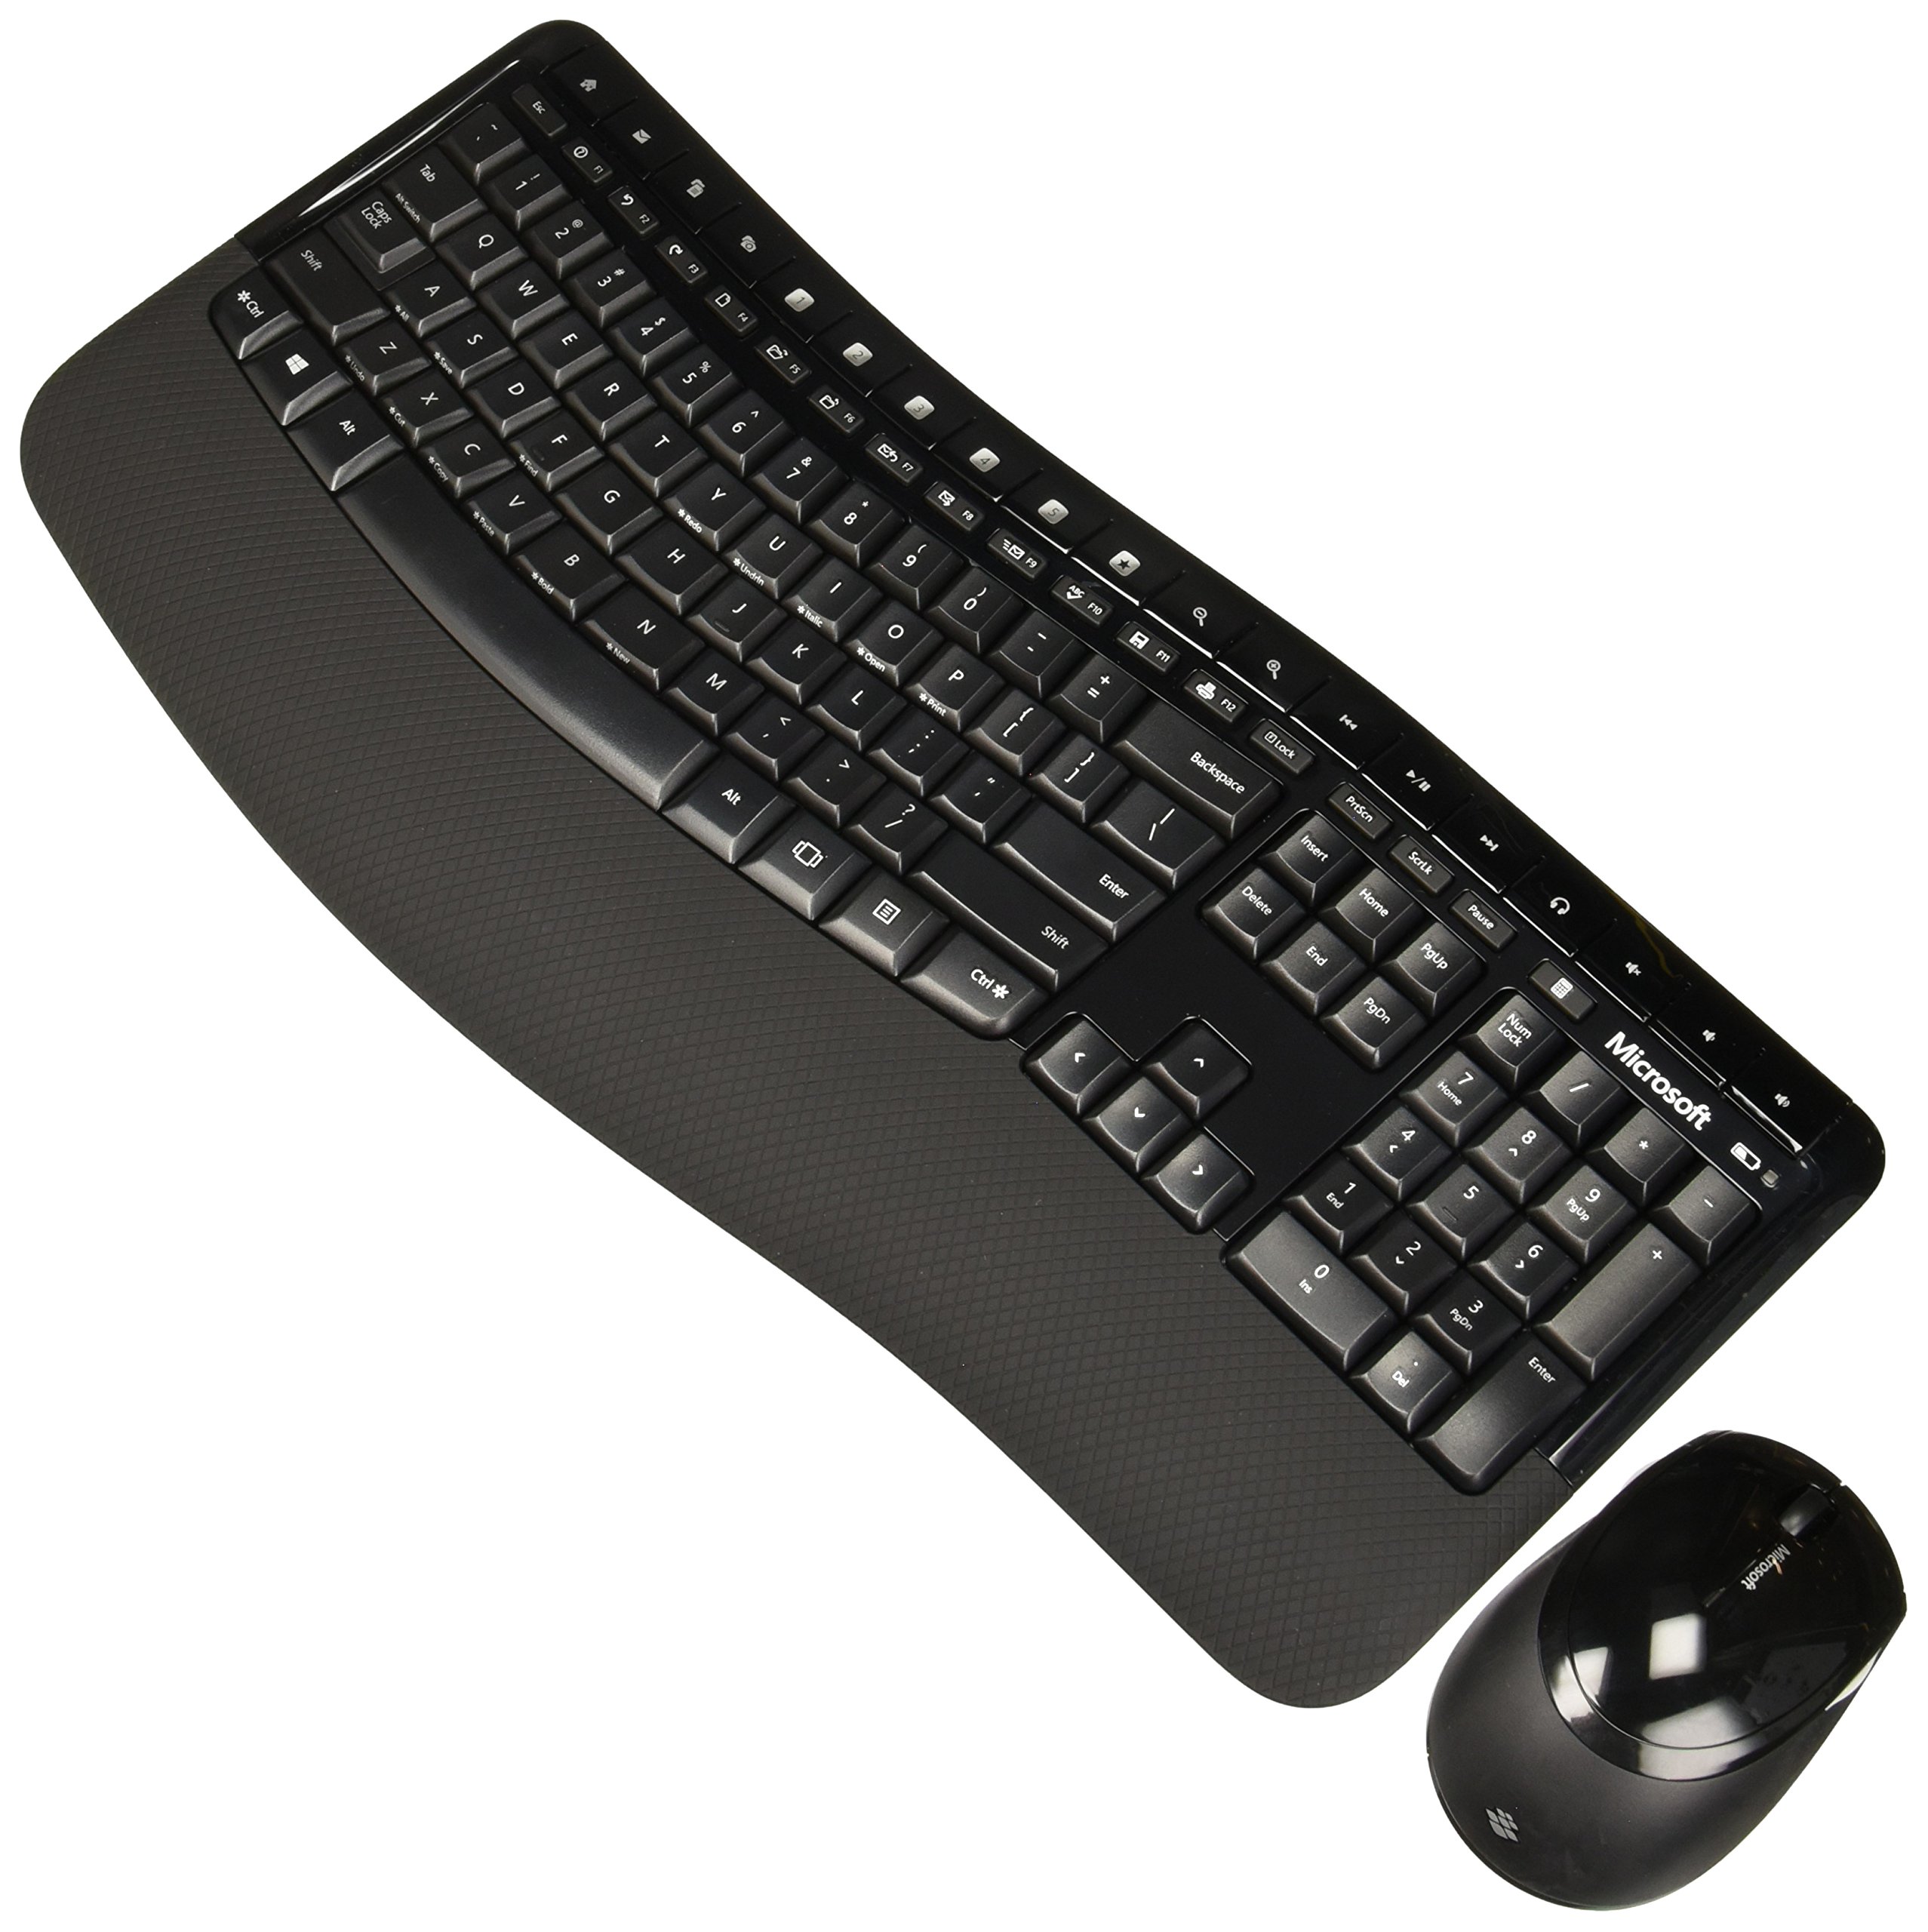 Book Cover Microsoft Wireless Comfort Desktop 5050 - Black. Wireless, Ergonomic Keyboard and Mouse Combo. Built-in Palm Rest and Comfort Curve Design. Customizable Windows Shortcut Keys